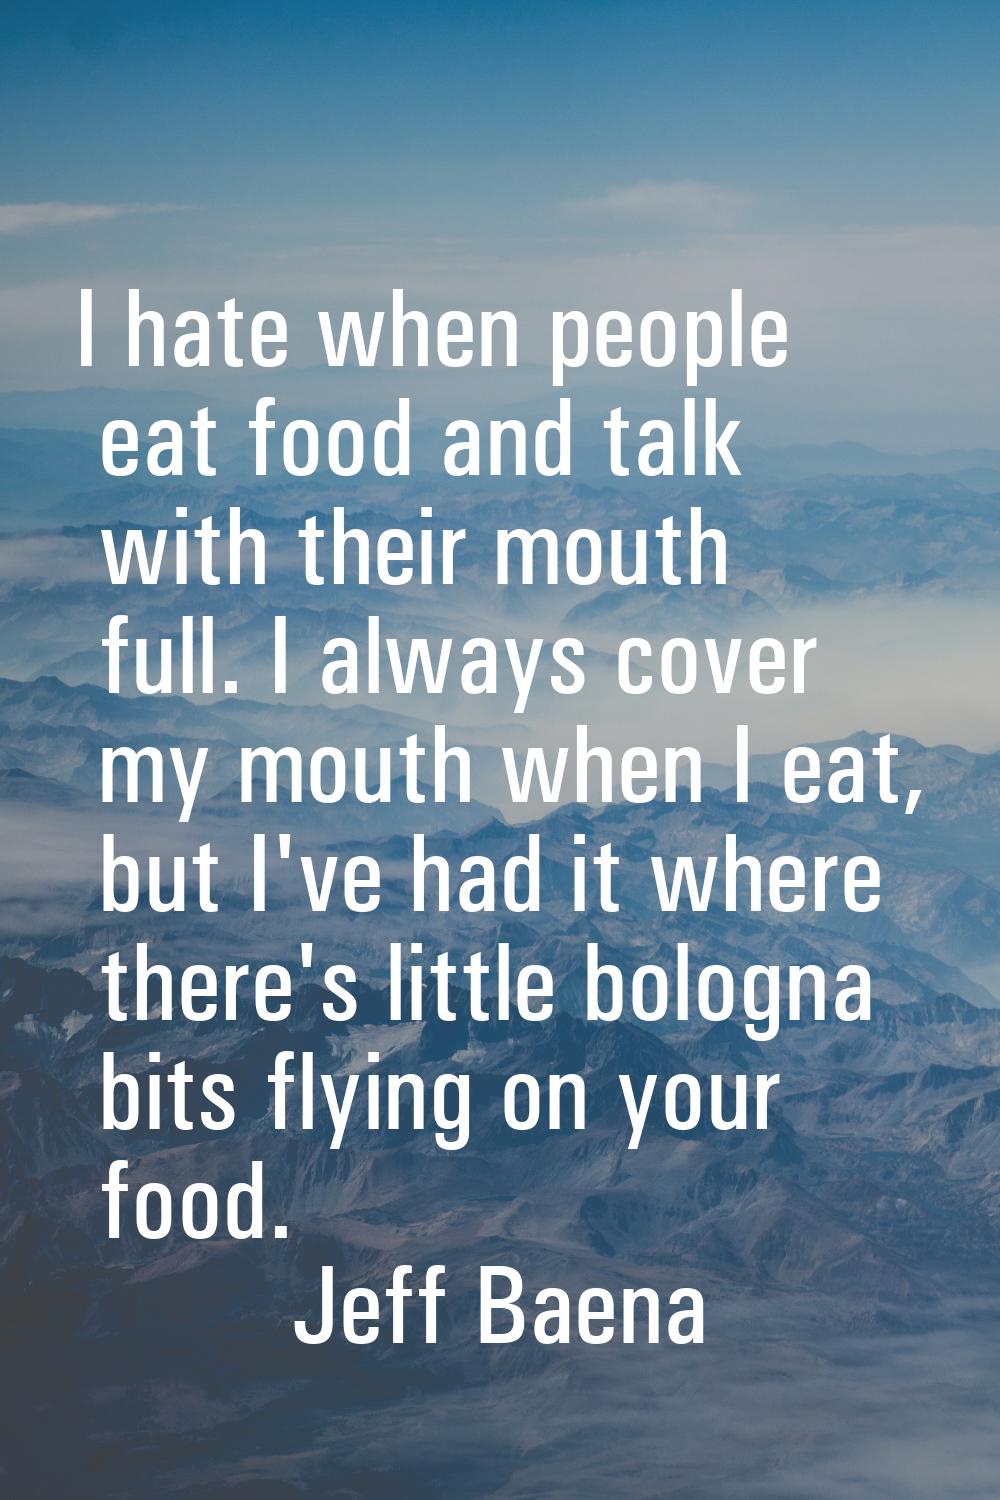 I hate when people eat food and talk with their mouth full. I always cover my mouth when I eat, but